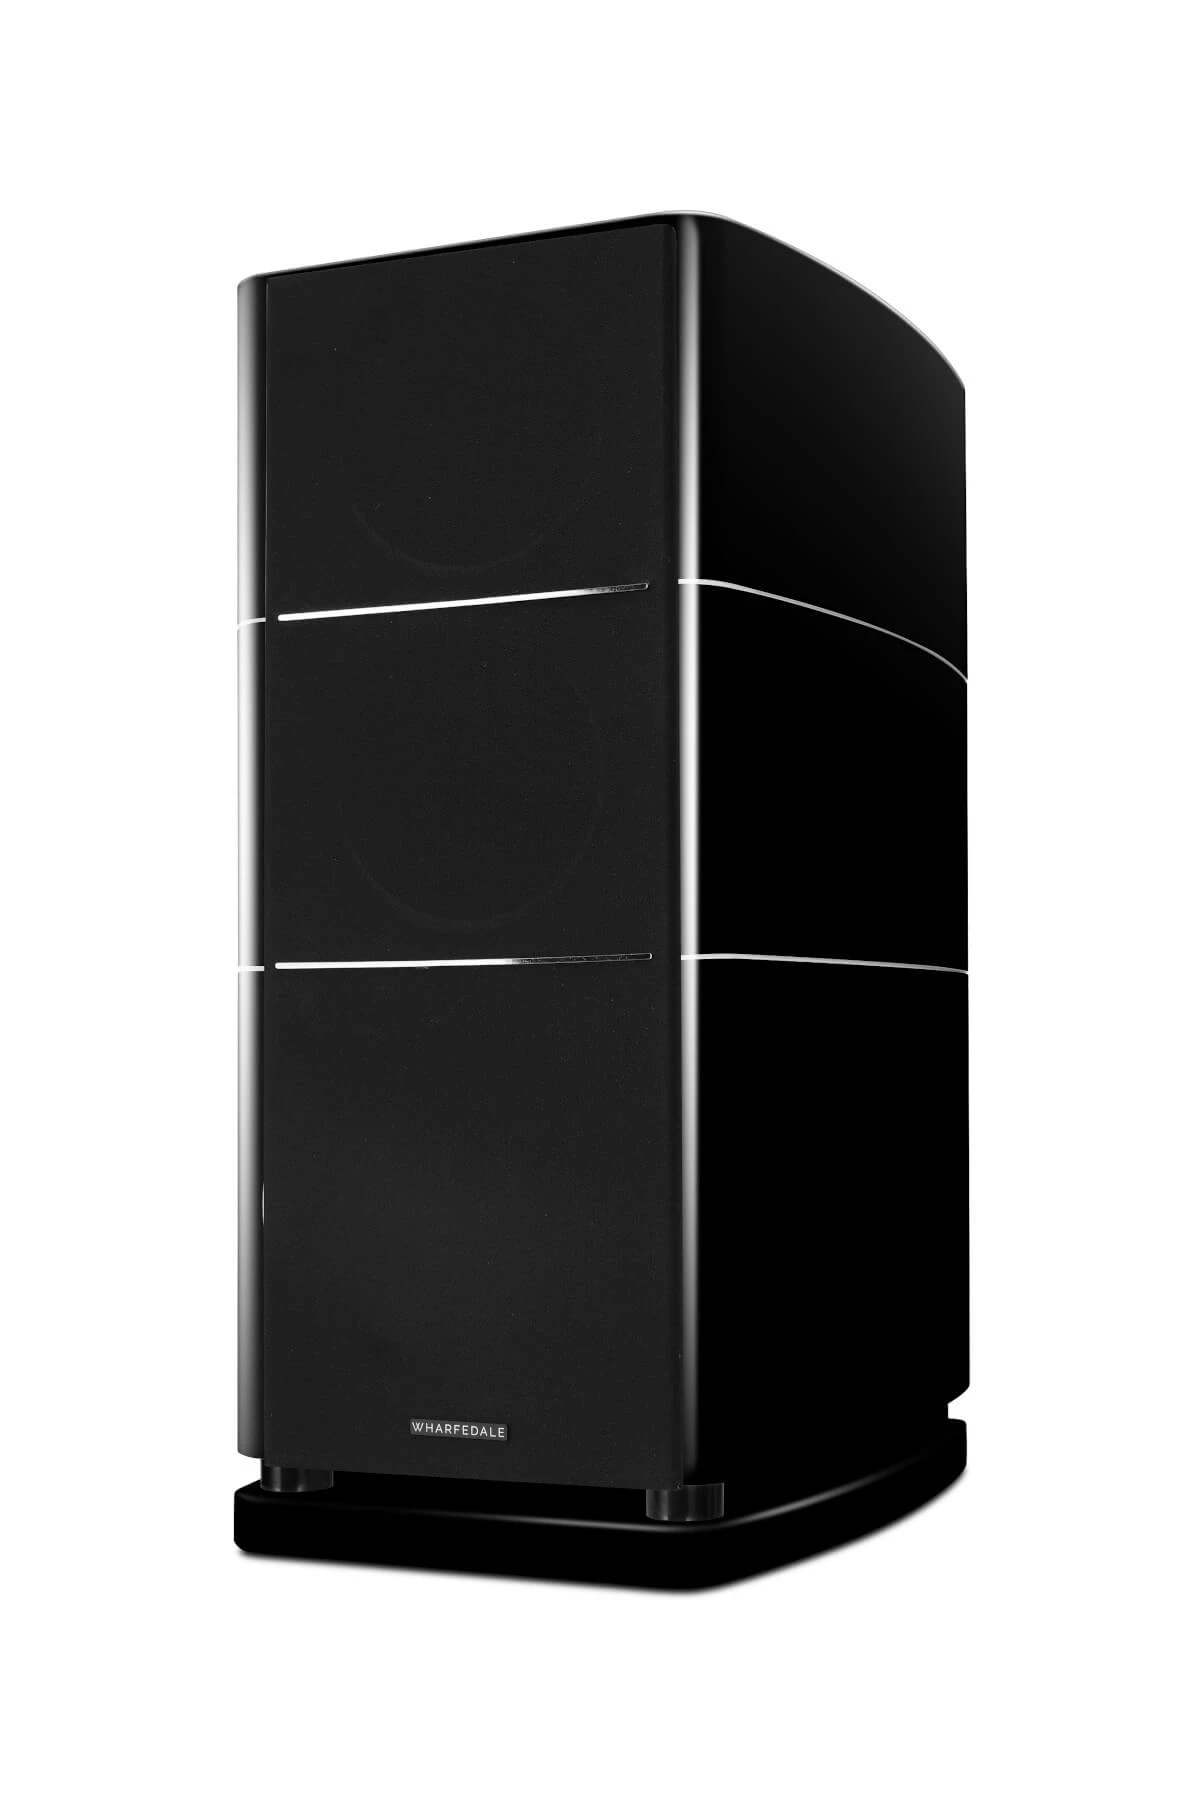 Wharfedale-Elysian-2-front-black-with-grill